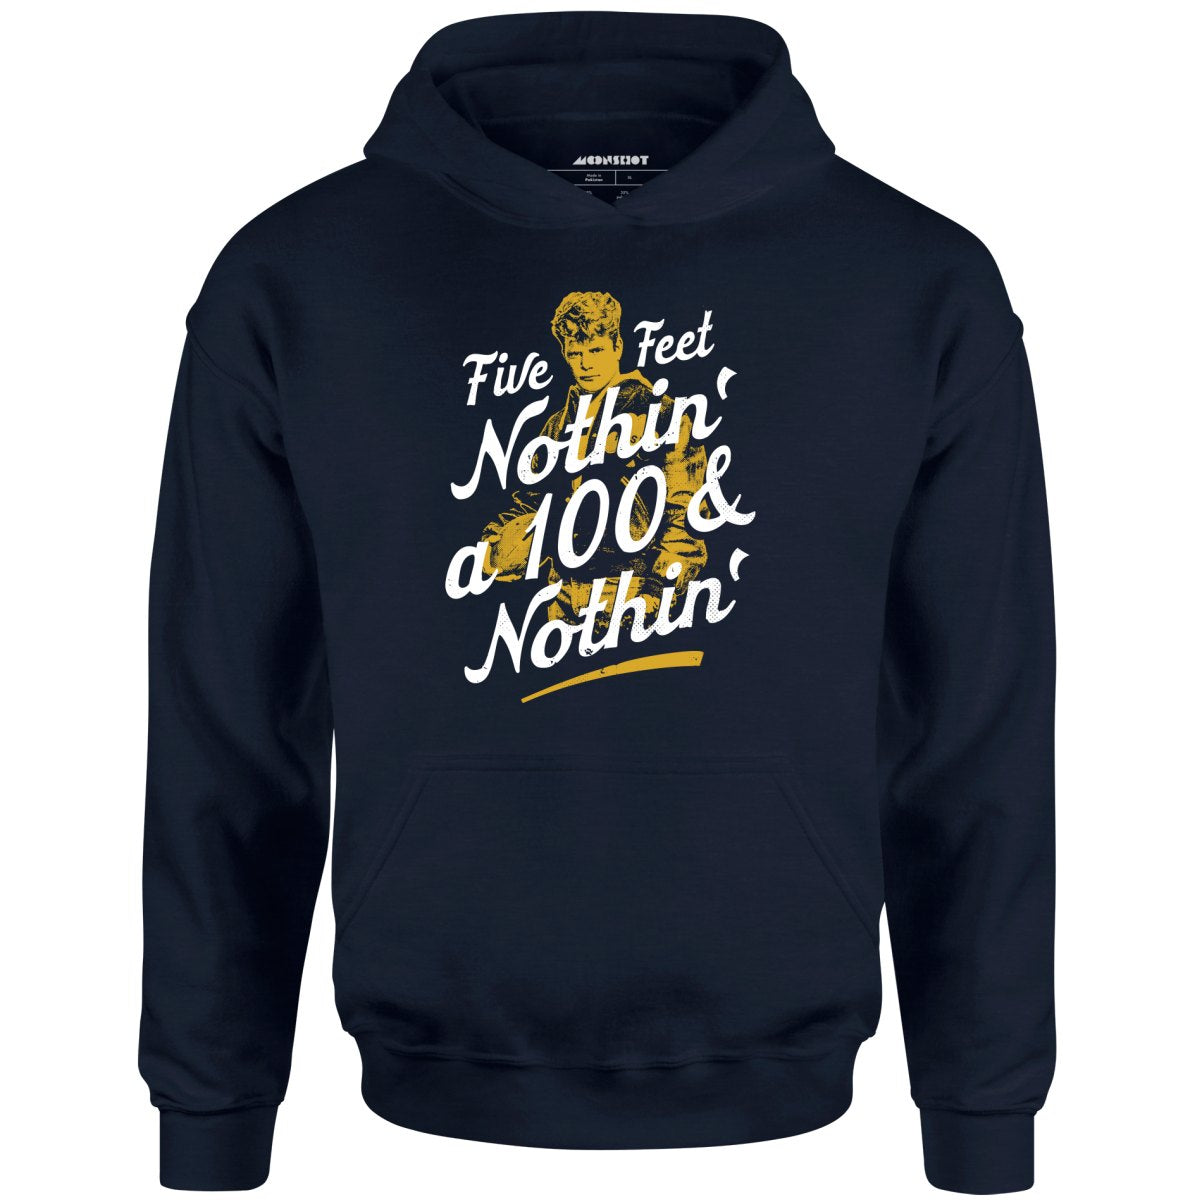 Rudy - Five Feet Nothin' a 100 & Nothin' - Unisex Hoodie